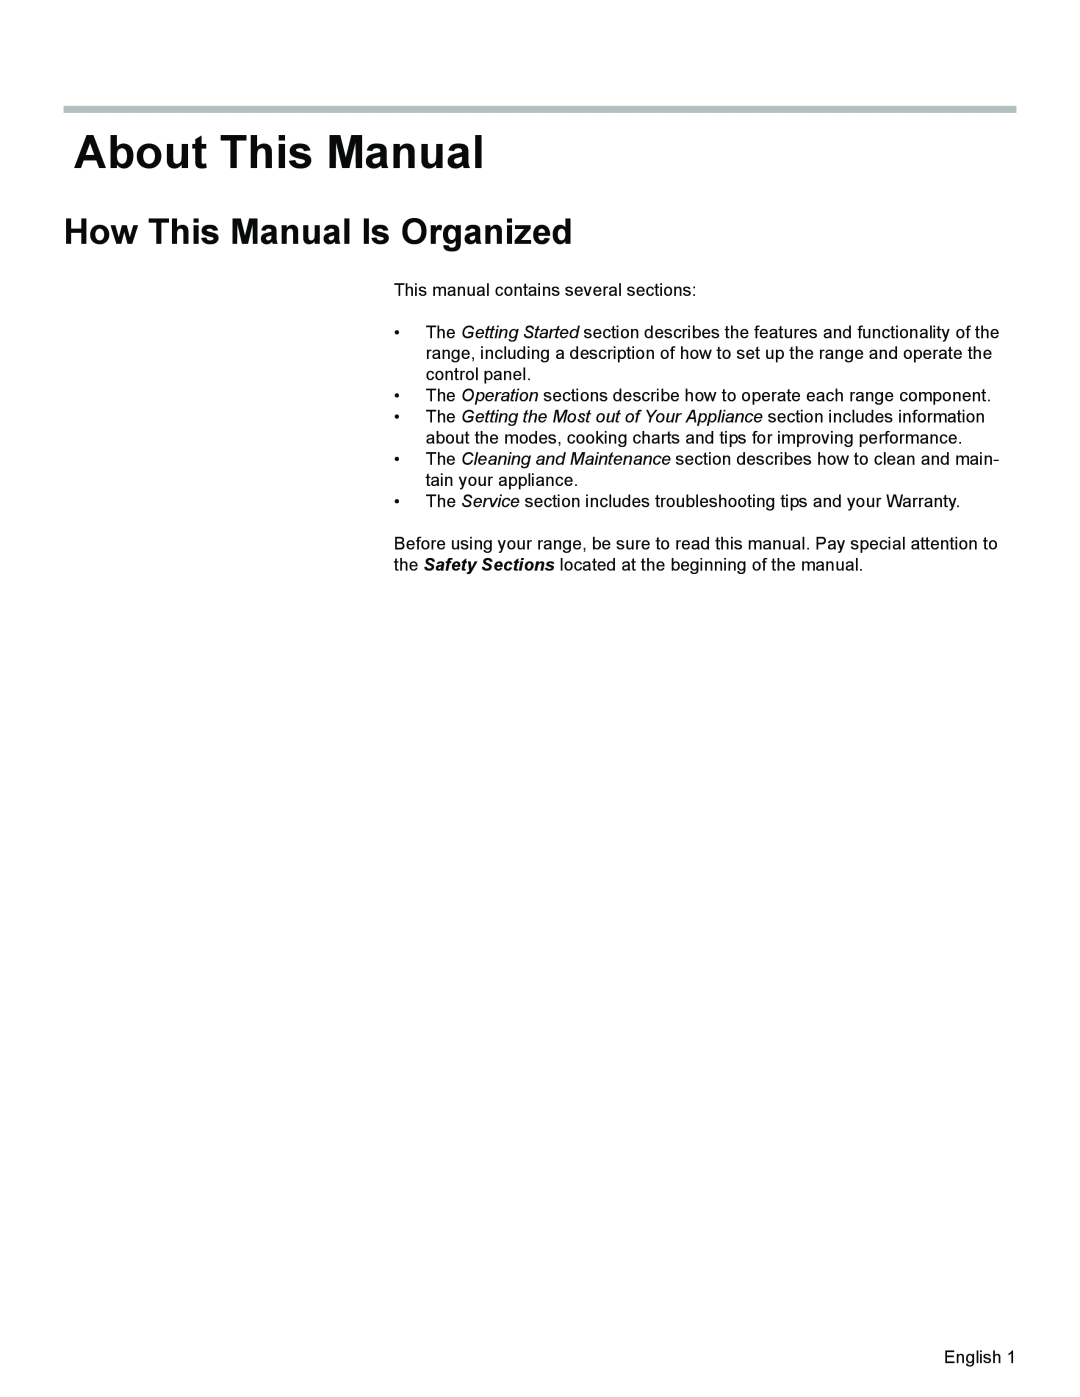 Siemens HD2525U, HD2528U manual About This Manual, How This Manual Is Organized 